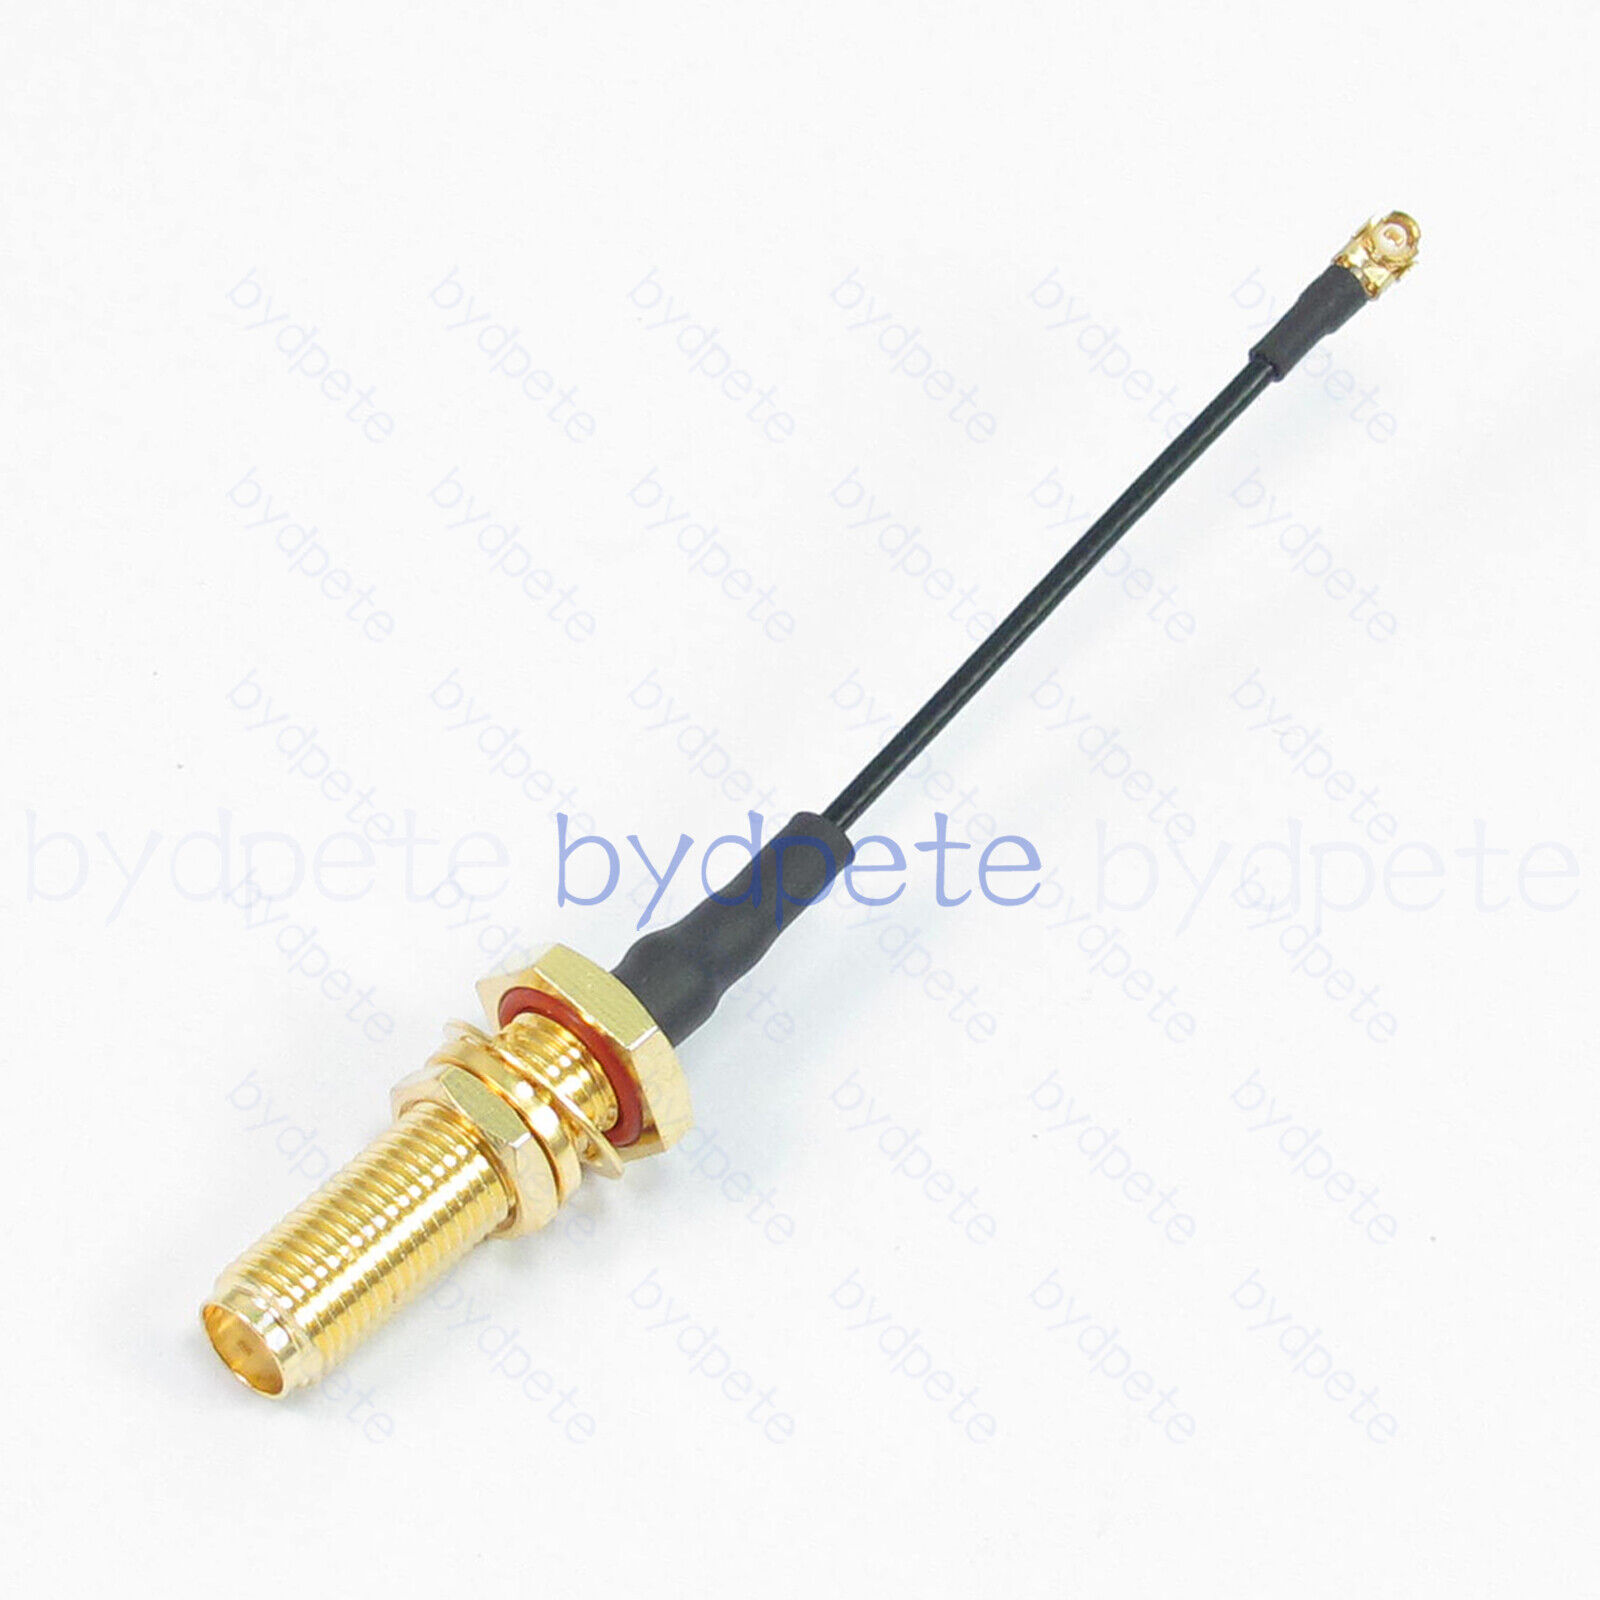 SMA female 20mm Long Screw bulkhead Waterproof to IPX IPX1 UFL Coax cable Kable